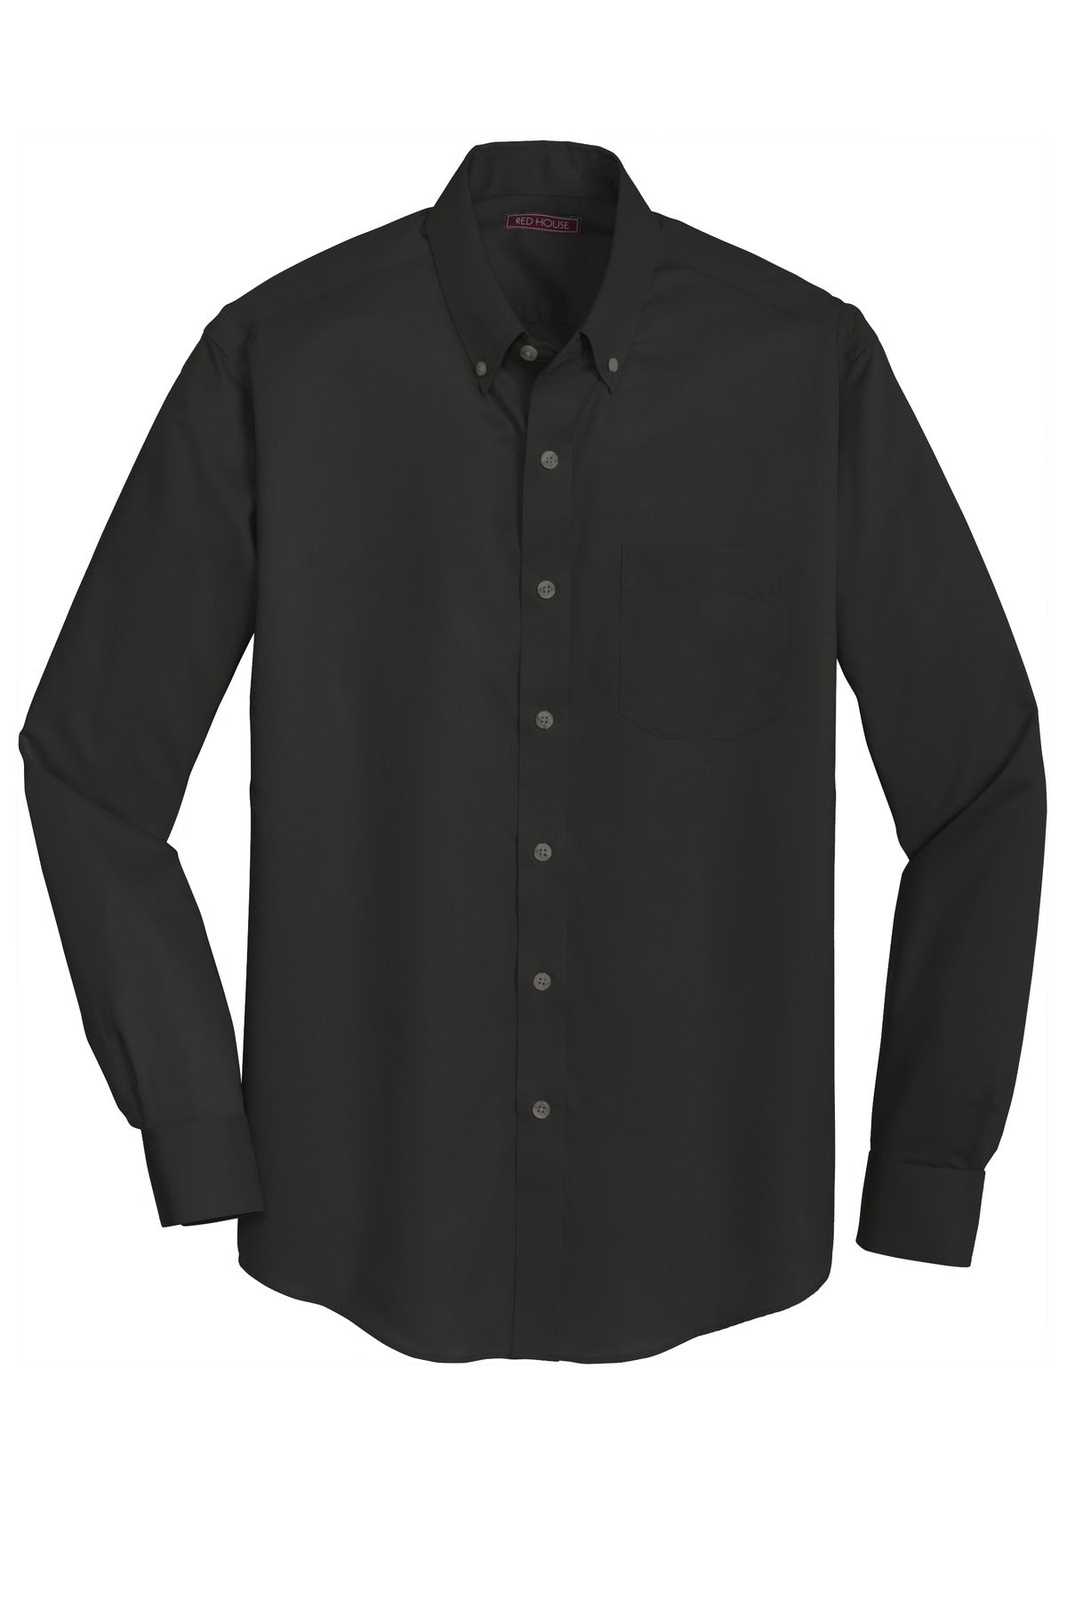 Red House RH78 Non-Iron Twill Shirt - Black - HIT a Double - 5